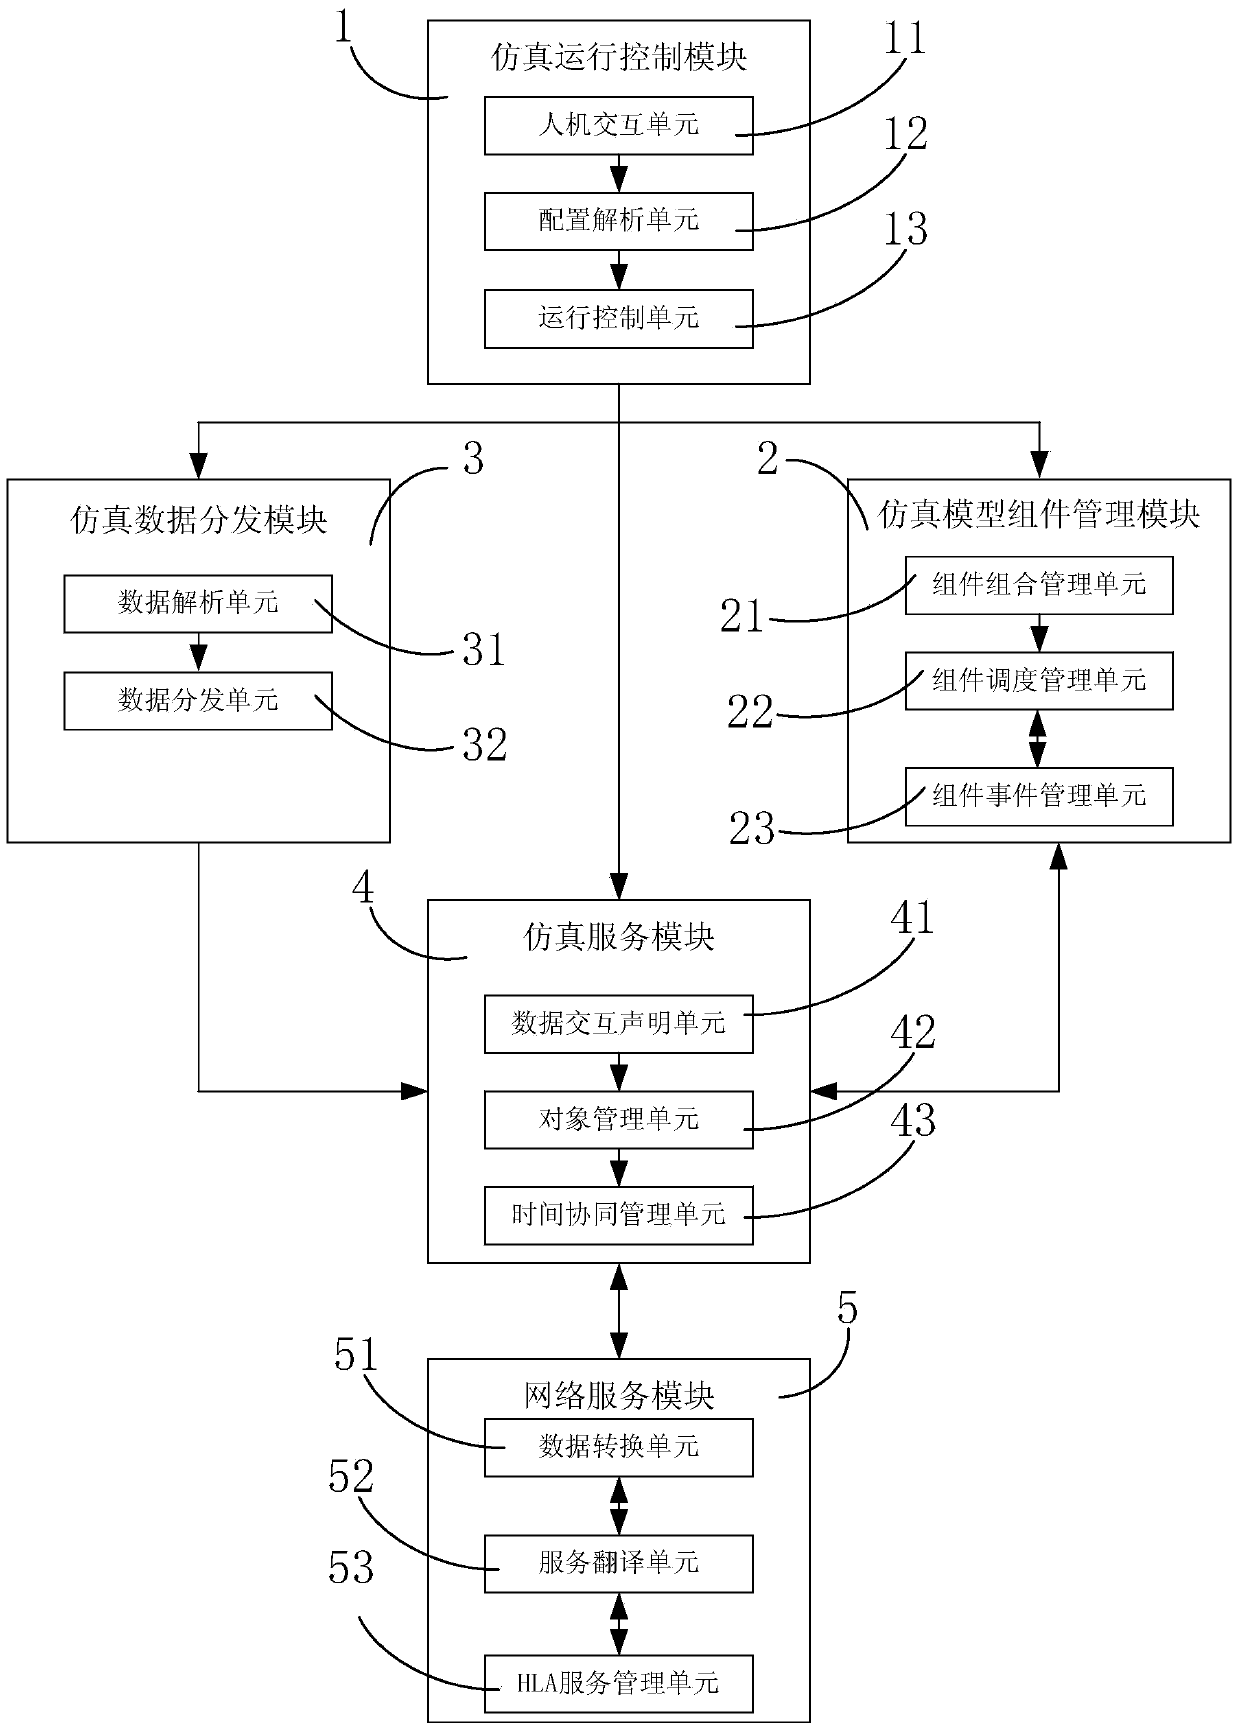 Distributed operation mode and centralized operation mode integrated simulation system operation supporting platform based on components